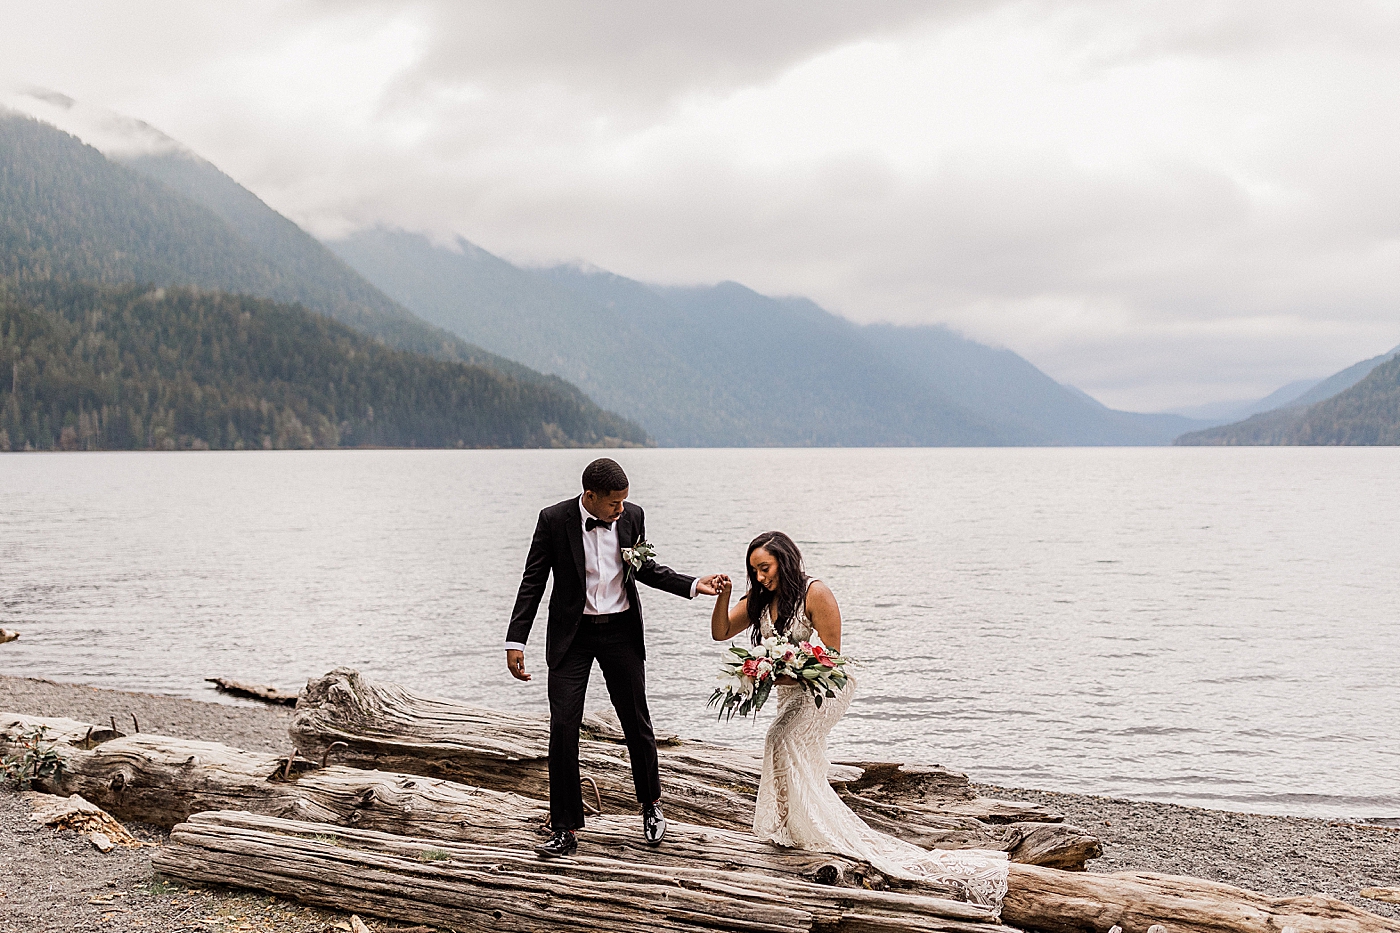 Groom helping his bride over the driftwood at Lake Crescent. Photo by Megan Montalvo Photography.